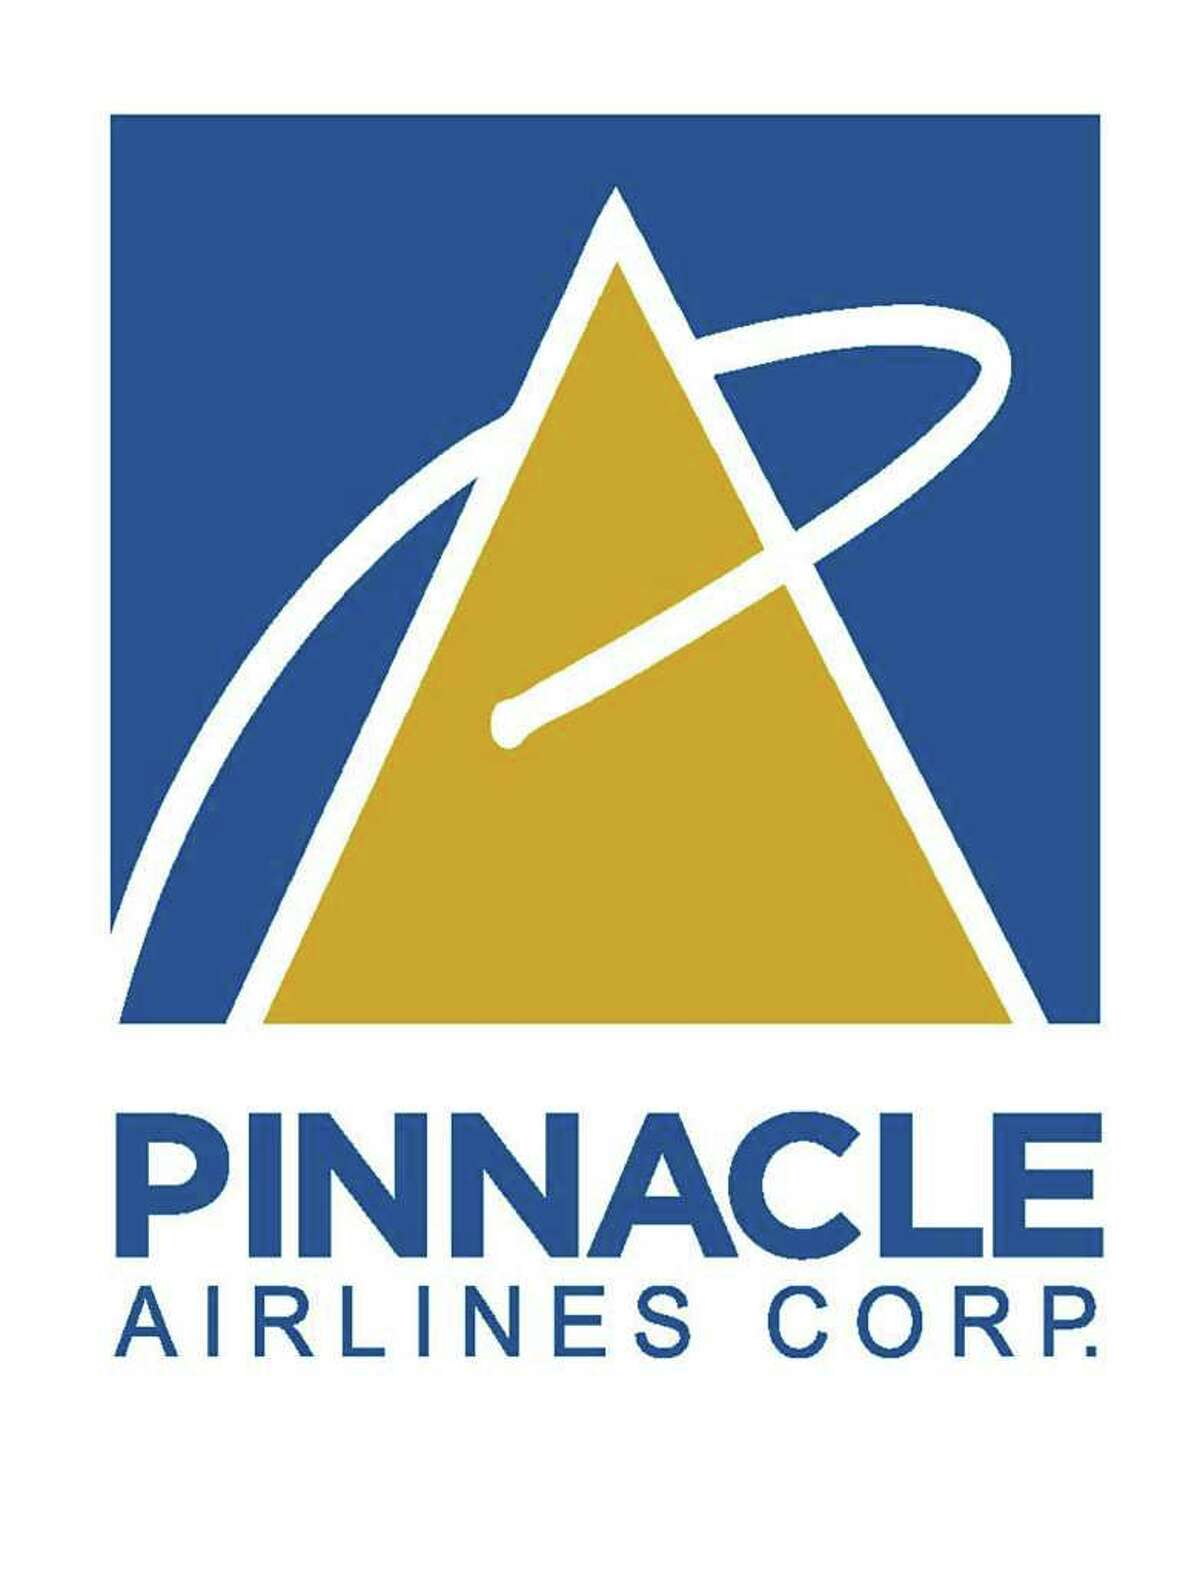 FILE - This undated file photo provided by Pinnacle Airlines Corp., shows the logo for Pinnacle Airlines Corp., based in Memphis, Tenn. Pinnacle Airlines says it's filed for bankruptcy protection in order to deal with its mounting debt and costs, The Associated Press reports Monday, April 2, 2012. The Memphis, Tenn.-based airline operates regional flights as Delta Connection, United Express and US Airways Express. It says its current business model isn't sustainable. (AP Photo/Pinnacle Airlines Corp. via PRNewsFoto, File)